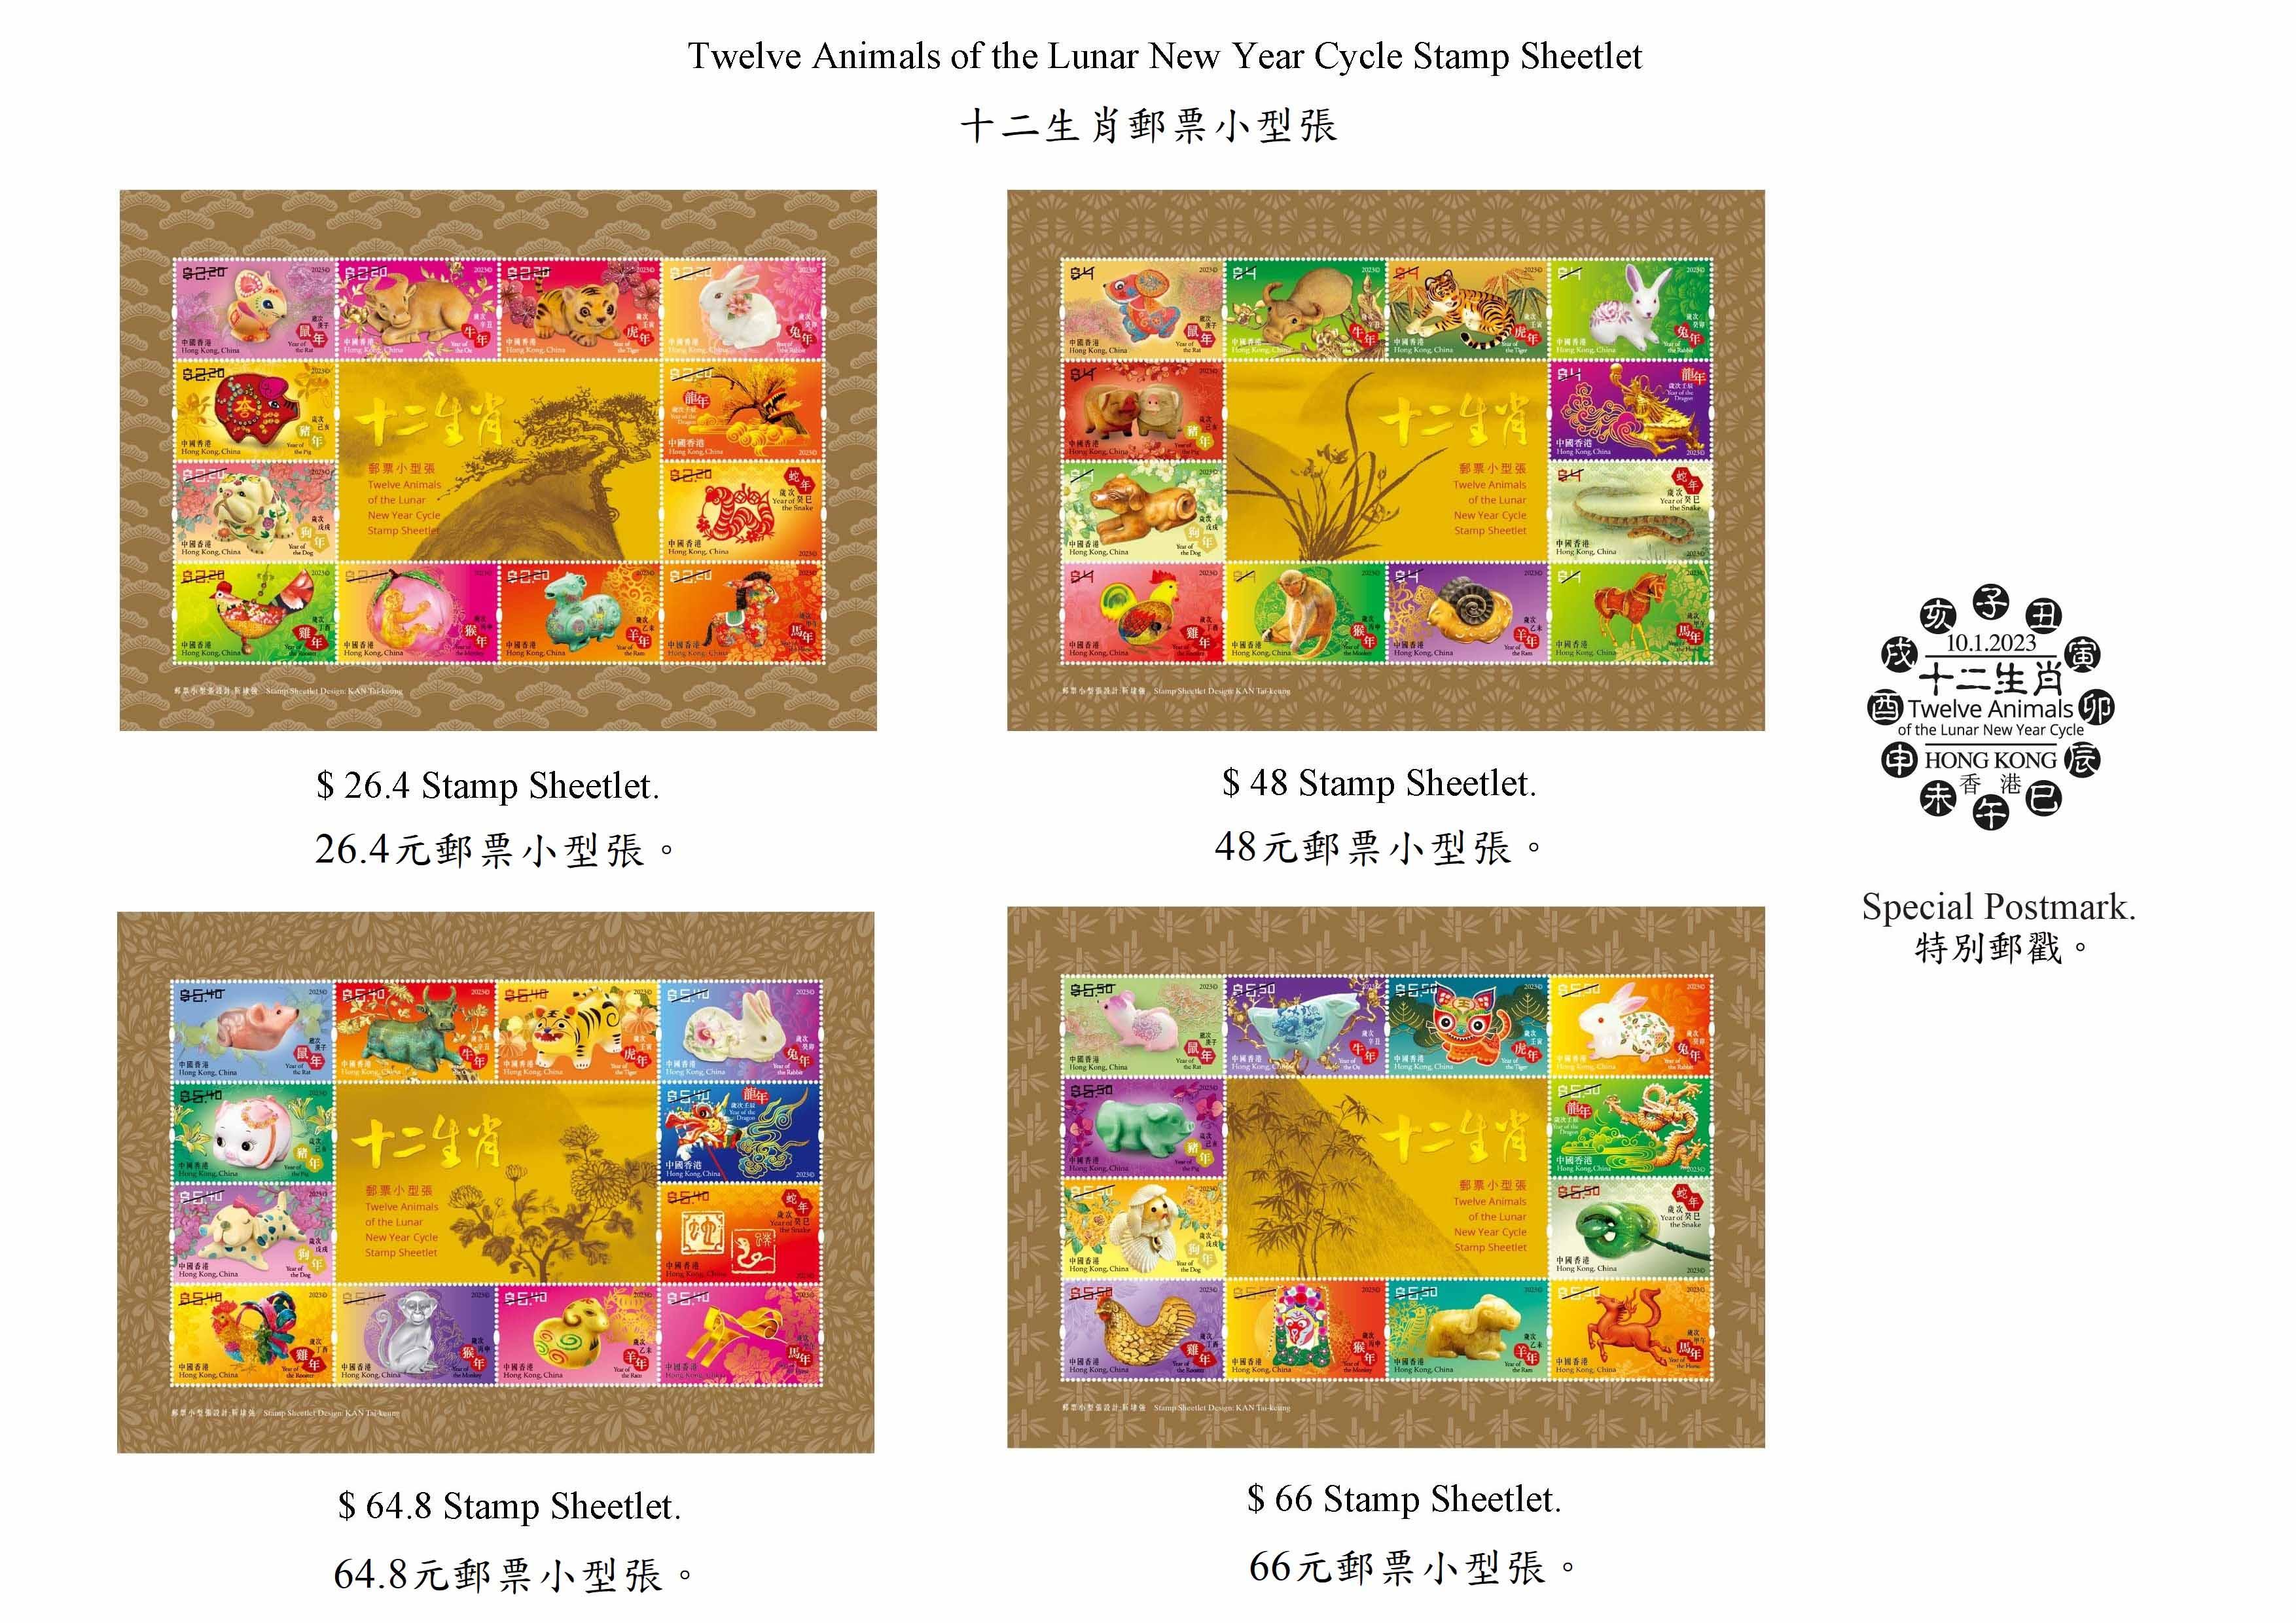 Hongkong Post will launch a special stamp issue and associated philatelic products with the theme "Year of the Rabbit" on January 10, 2023 (Tuesday). The "Twelve Animals of the Lunar New Year Cycle Stamp Sheetlet" will also be launched on the same day. Photo shows the stamp sheetlets and the special postmark.

